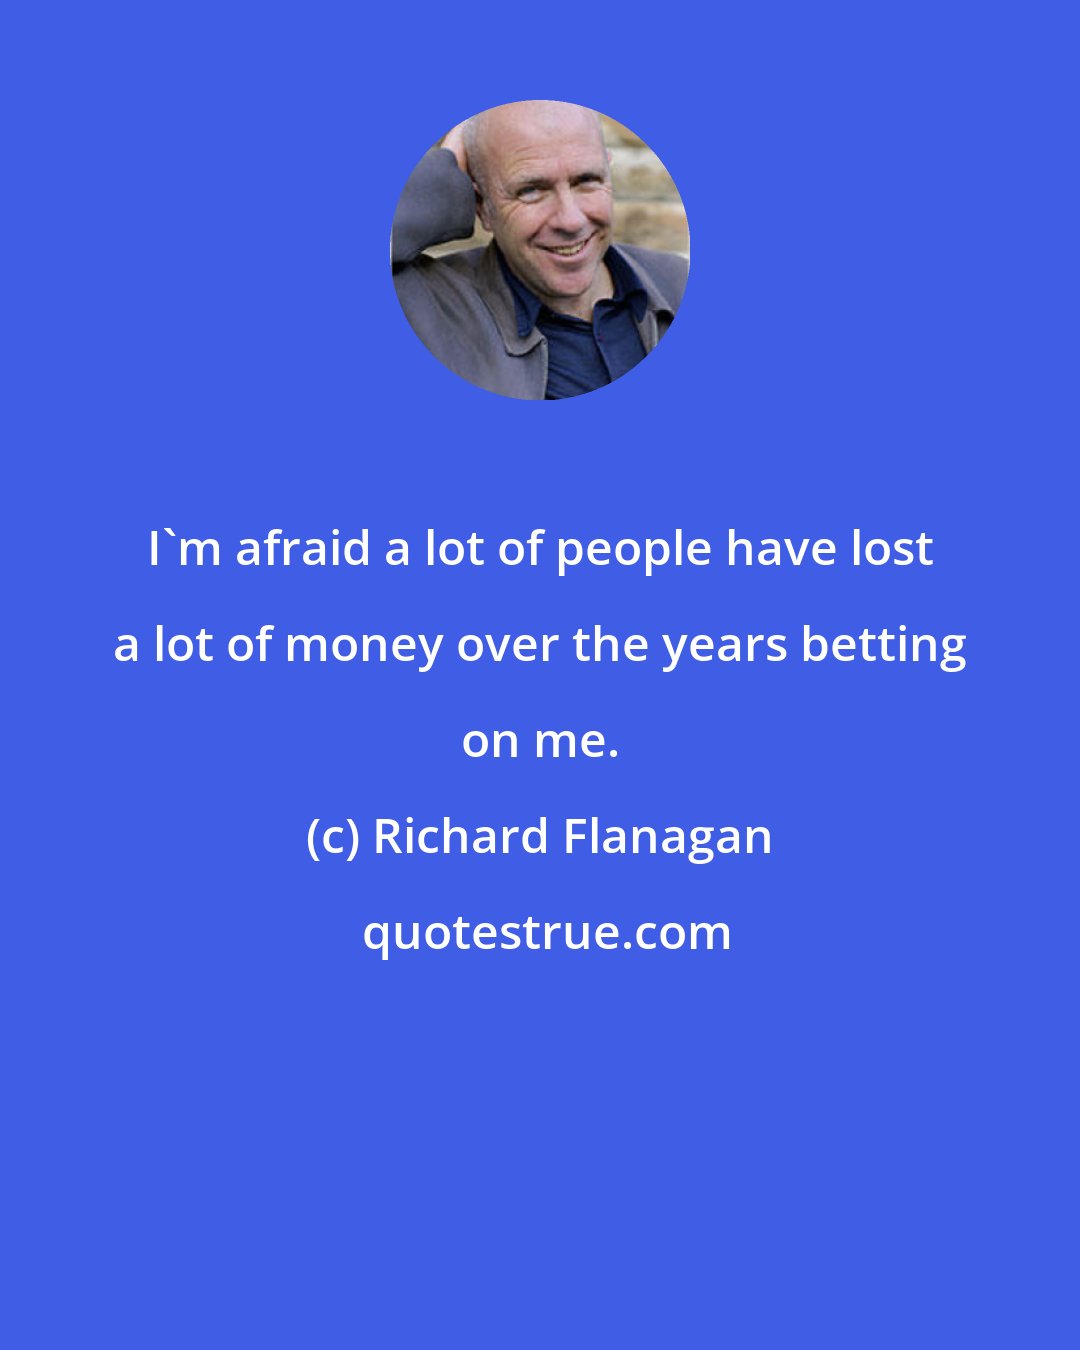 Richard Flanagan: I'm afraid a lot of people have lost a lot of money over the years betting on me.